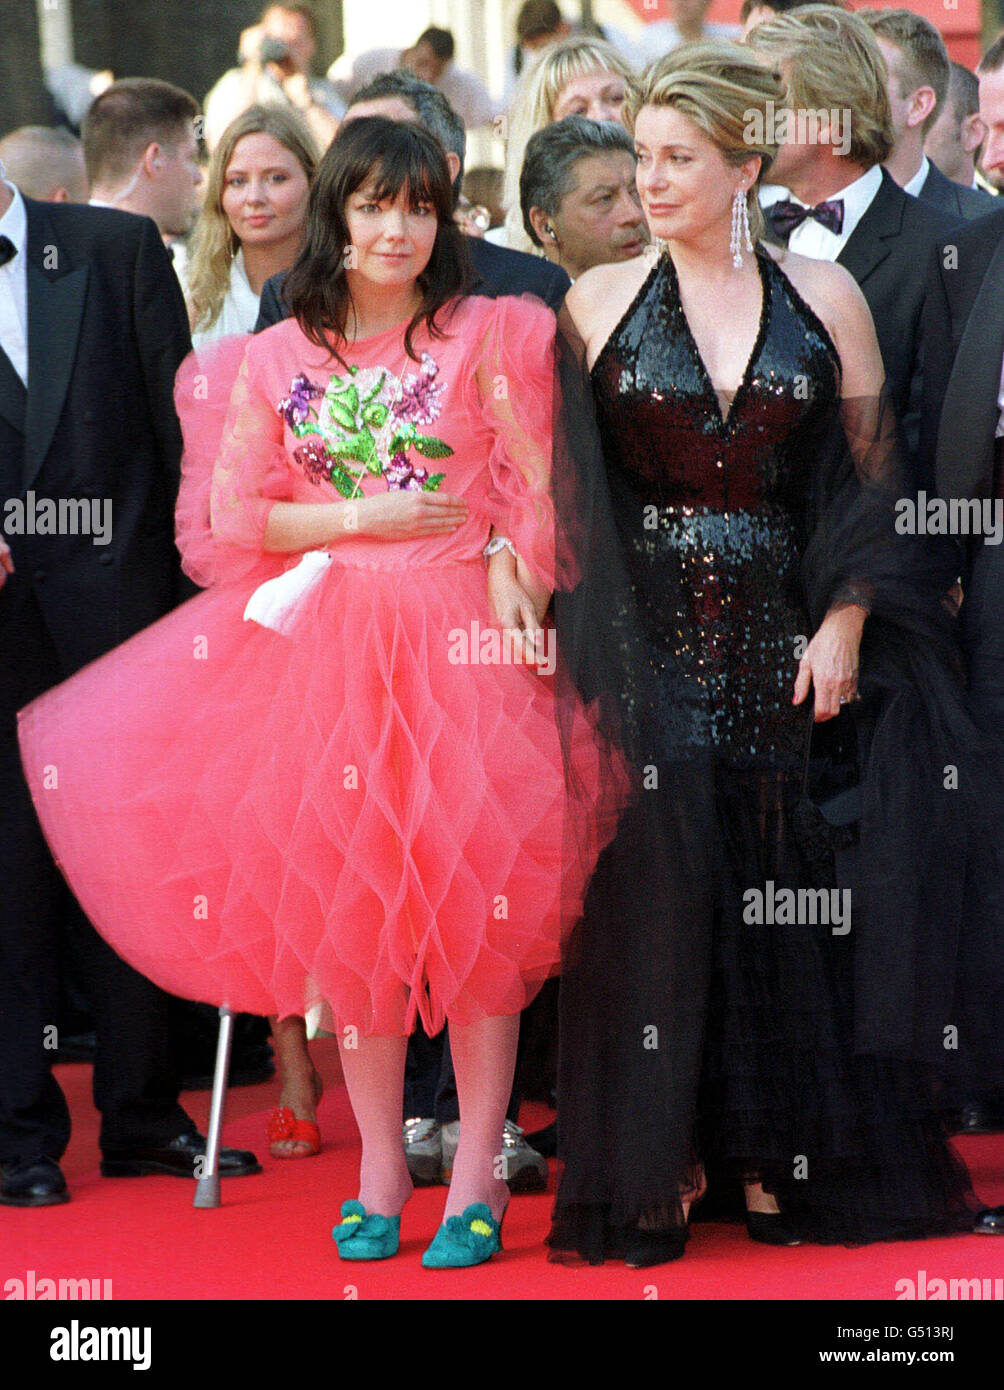 Singer Bjork from Iceland poses for photographers as she arrives at the premiere to 'Dancer in the Dark', in which she stars, with actress Catherine Deneuve (right) at the Cannes Film Festival, France. Stock Photo